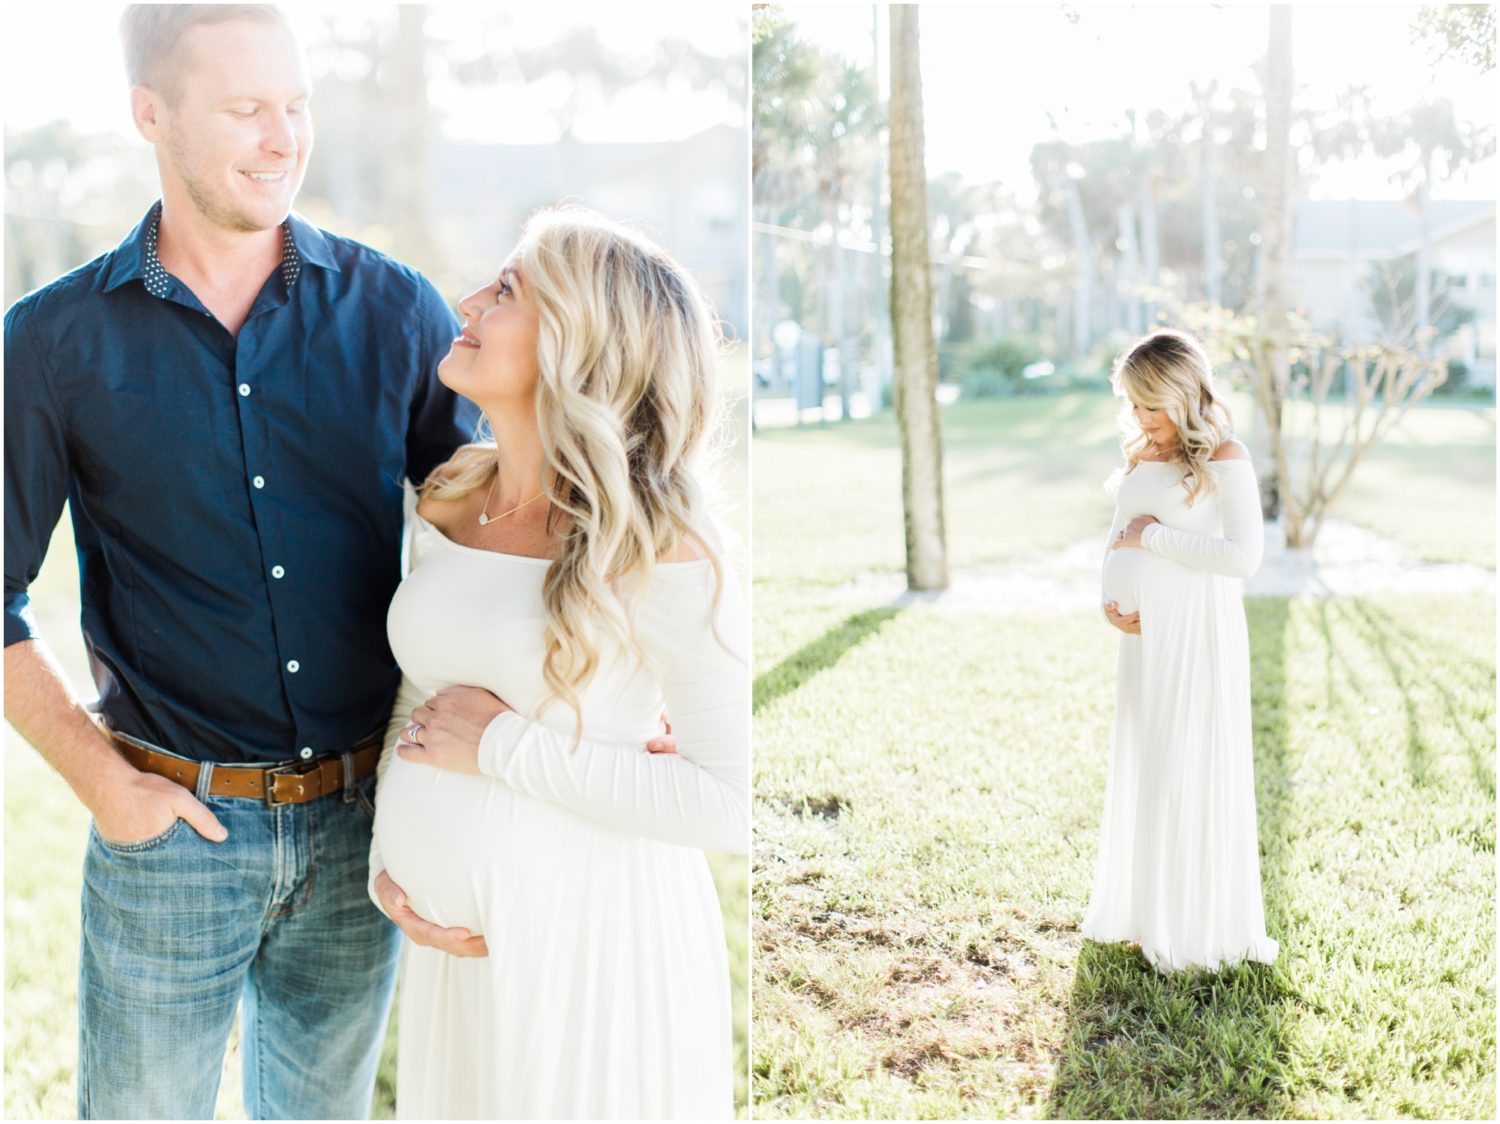 Jacksonville Lifestyle Photographers, Brooke Images, Larissa and Darren's Lifestyle Session, Maternity Session, Beach Session